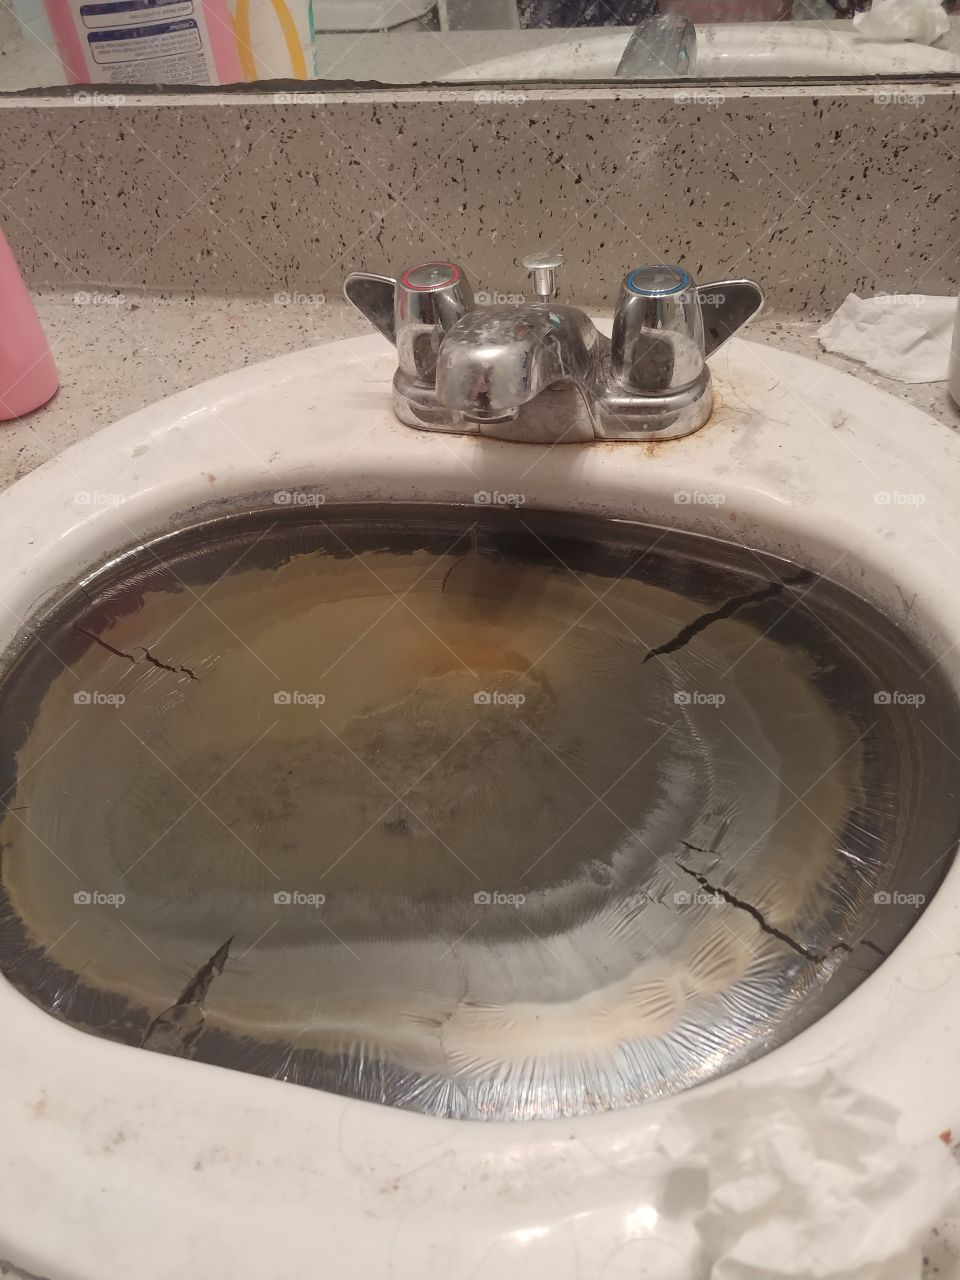 Ever seen a sink do 'this' before? Yeeesh!